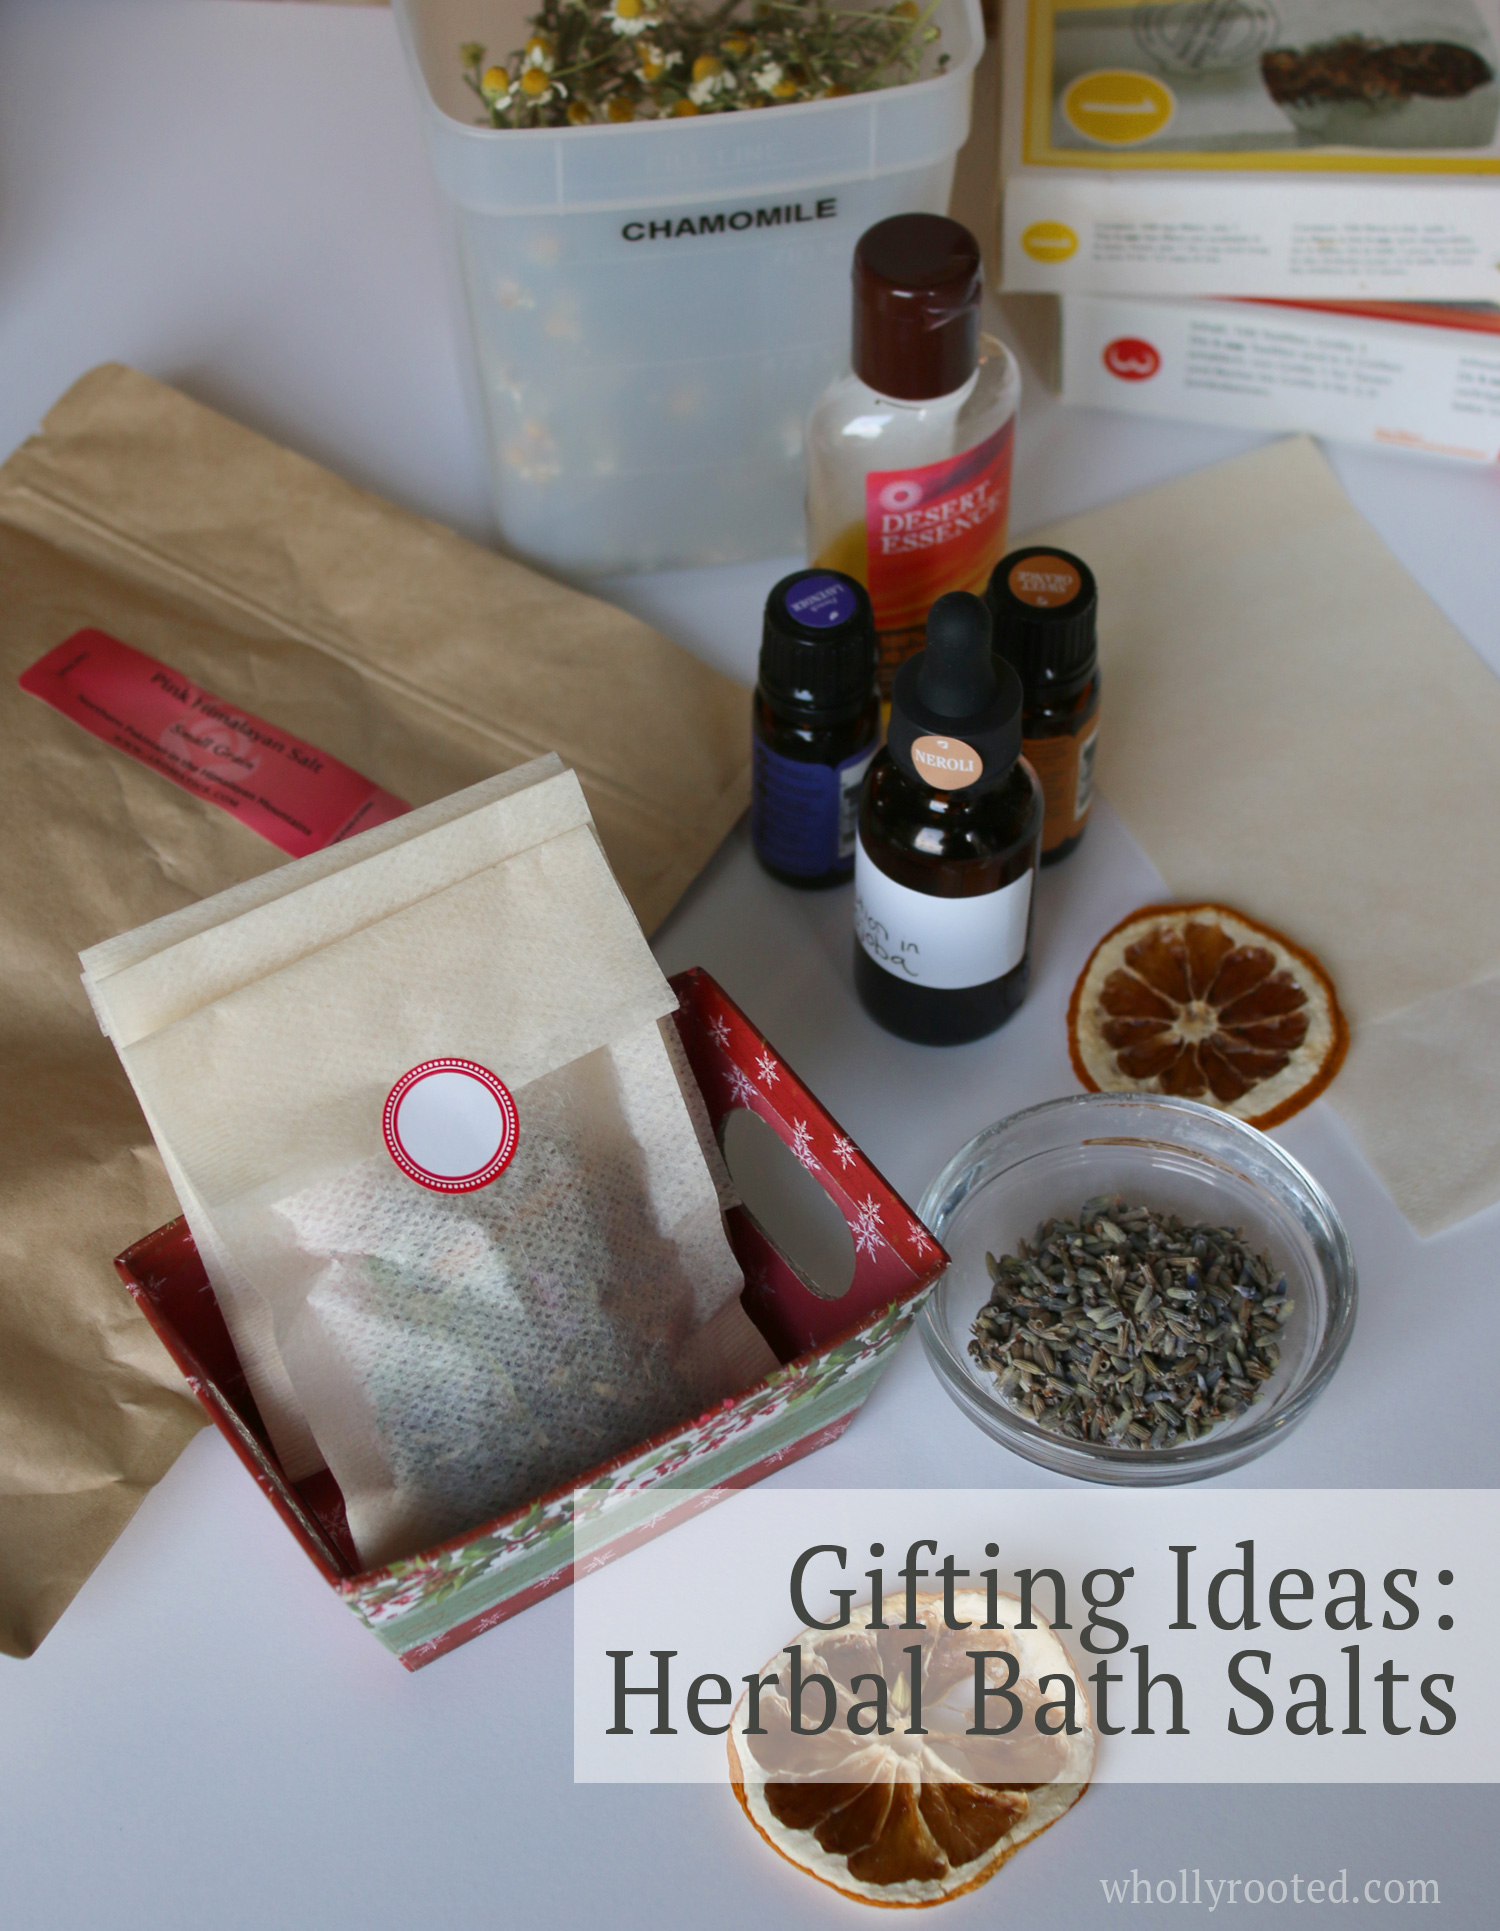 Gifting Ideas: How to make Herbal Bath Salts @ WhollyRooted.com